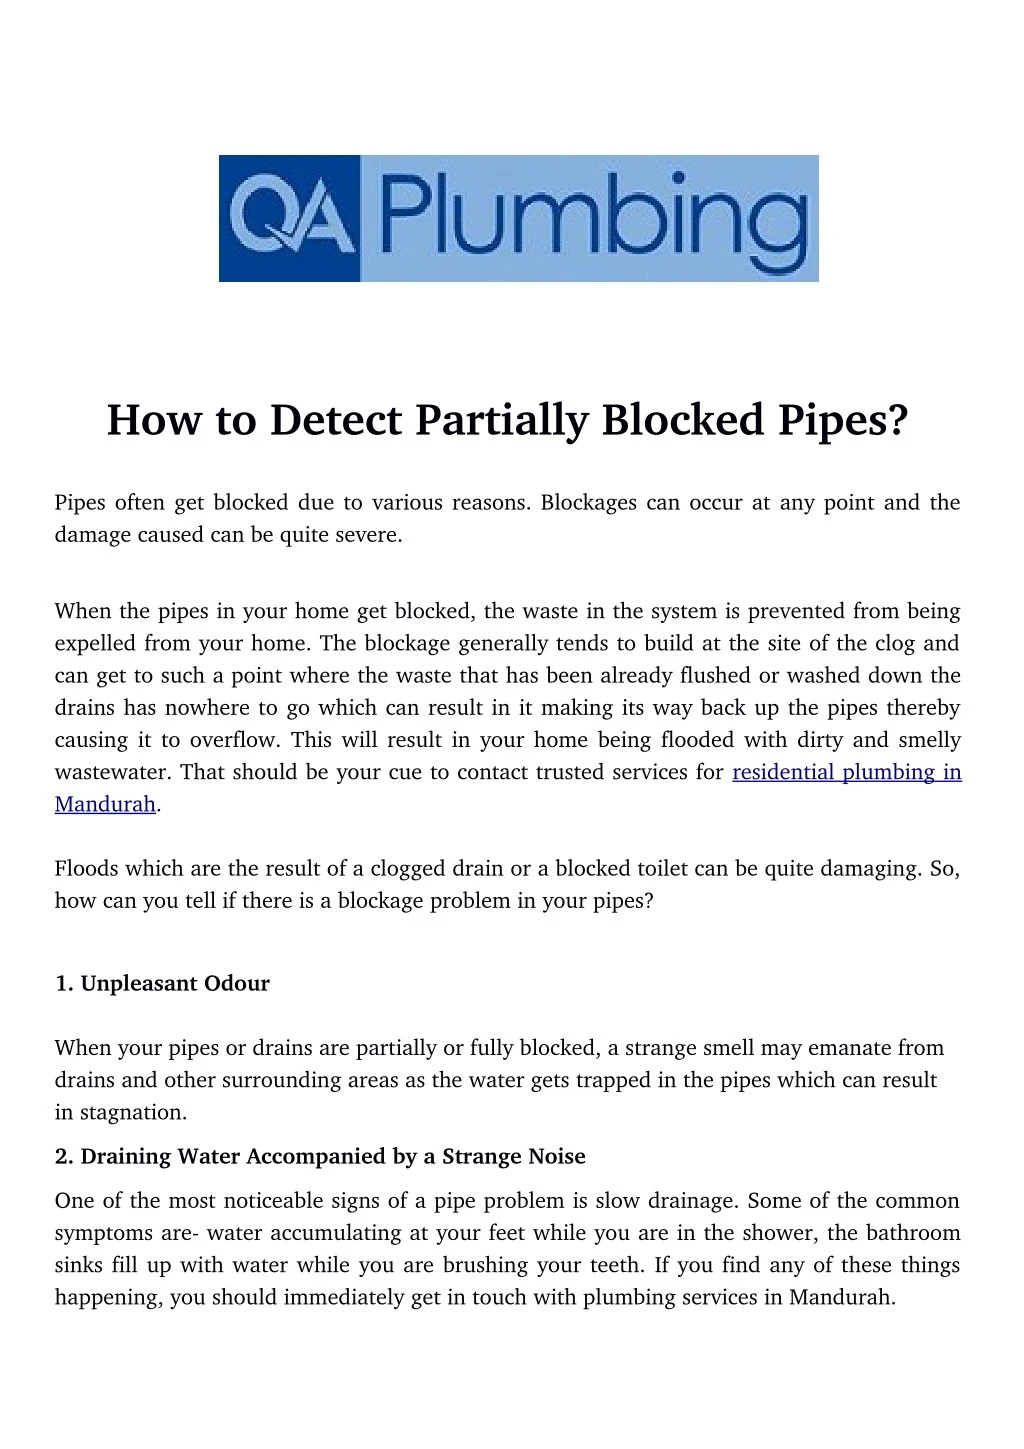 how to detect partially blocked pipes